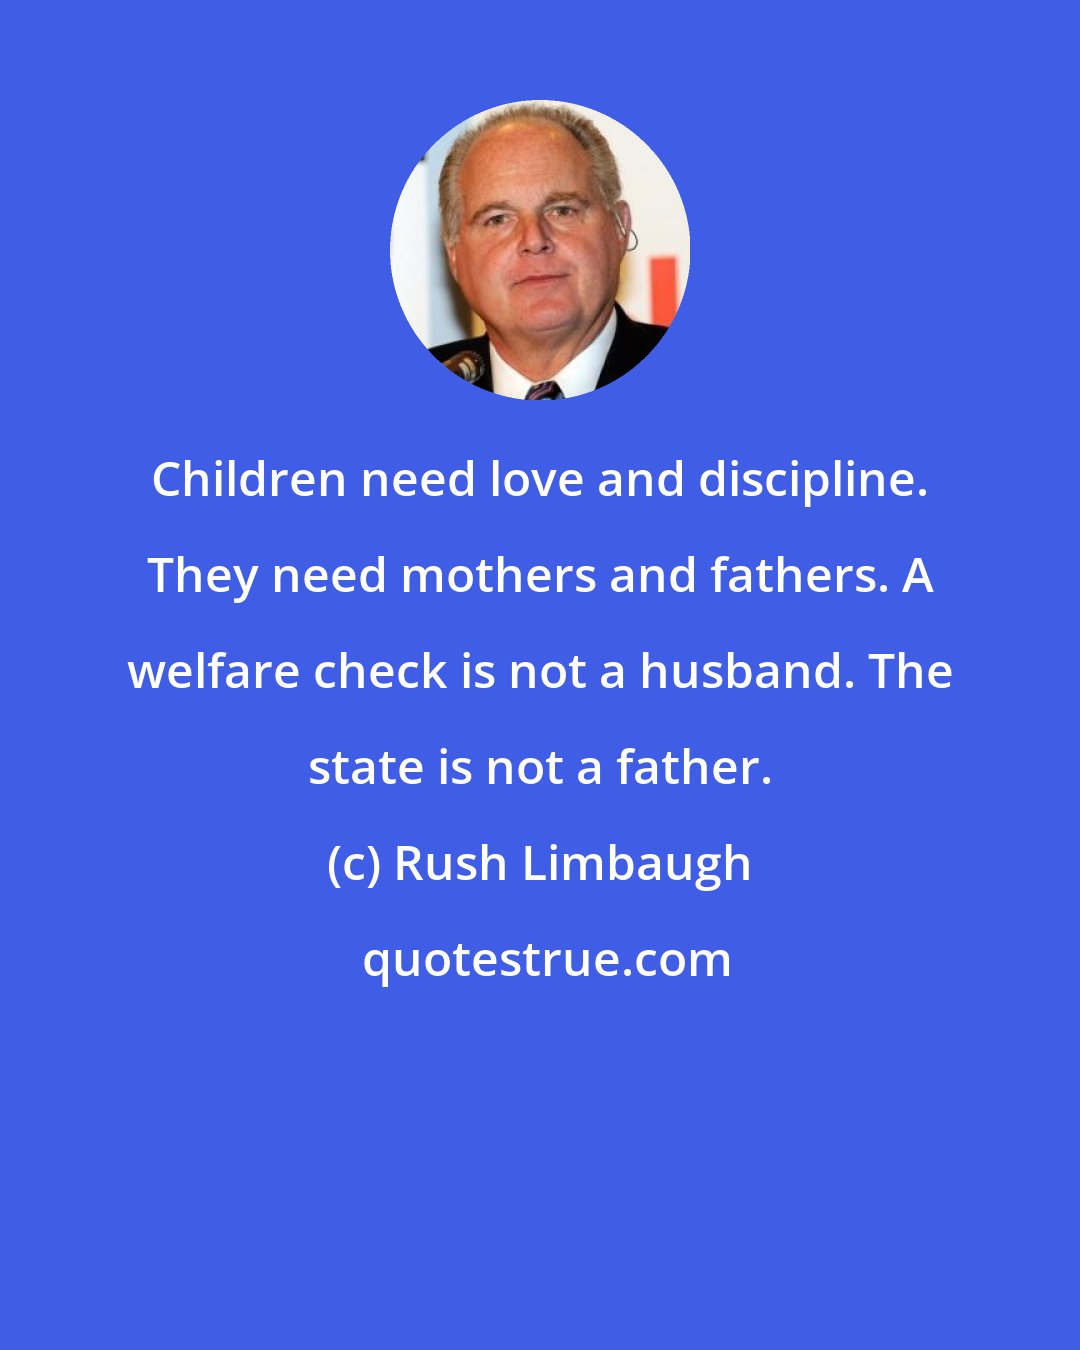 Rush Limbaugh: Children need love and discipline. They need mothers and fathers. A welfare check is not a husband. The state is not a father.